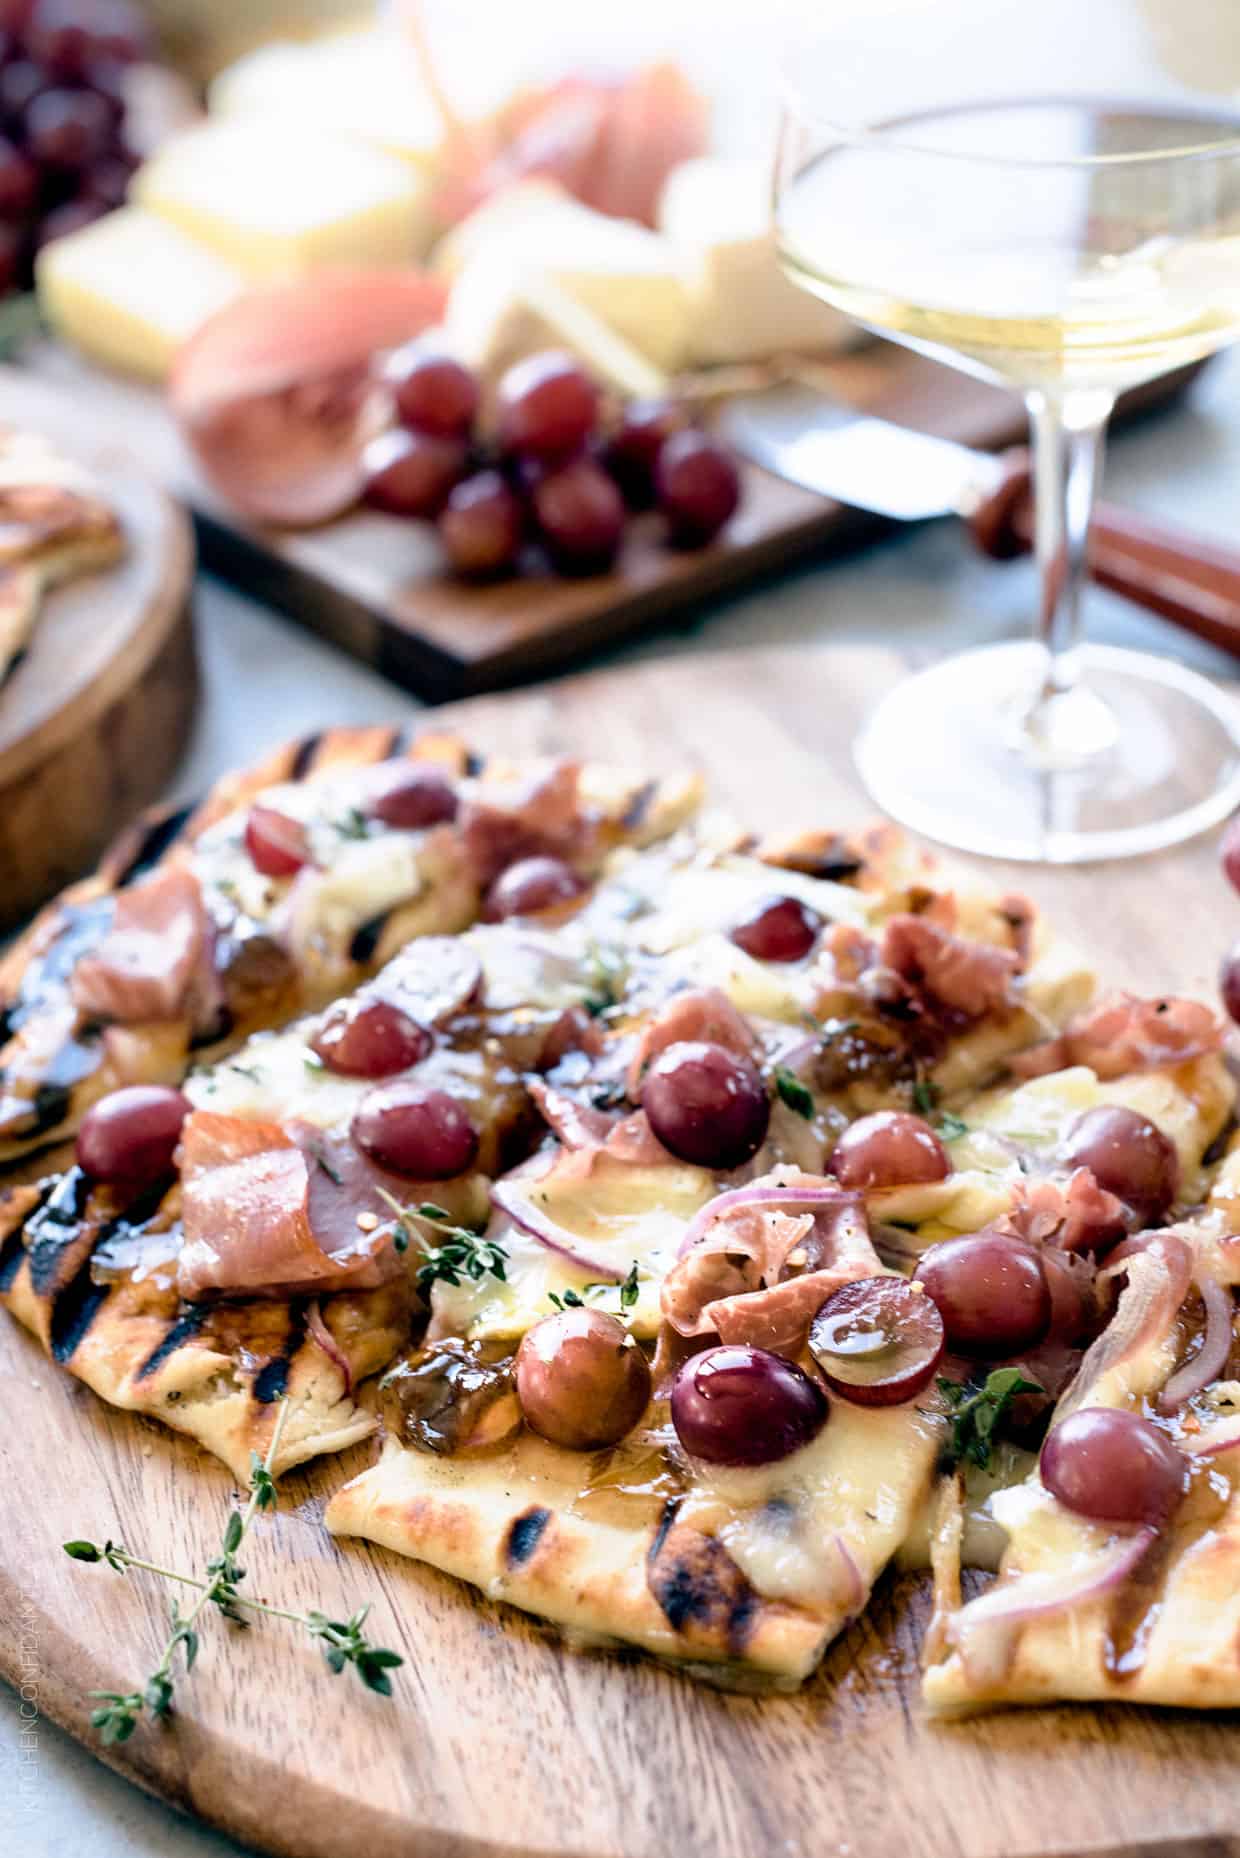 Grilled Naan Flatbread with Grapes, Onion Jam, Prosciutto and Double-Crème Cheese on a wooden serving board.